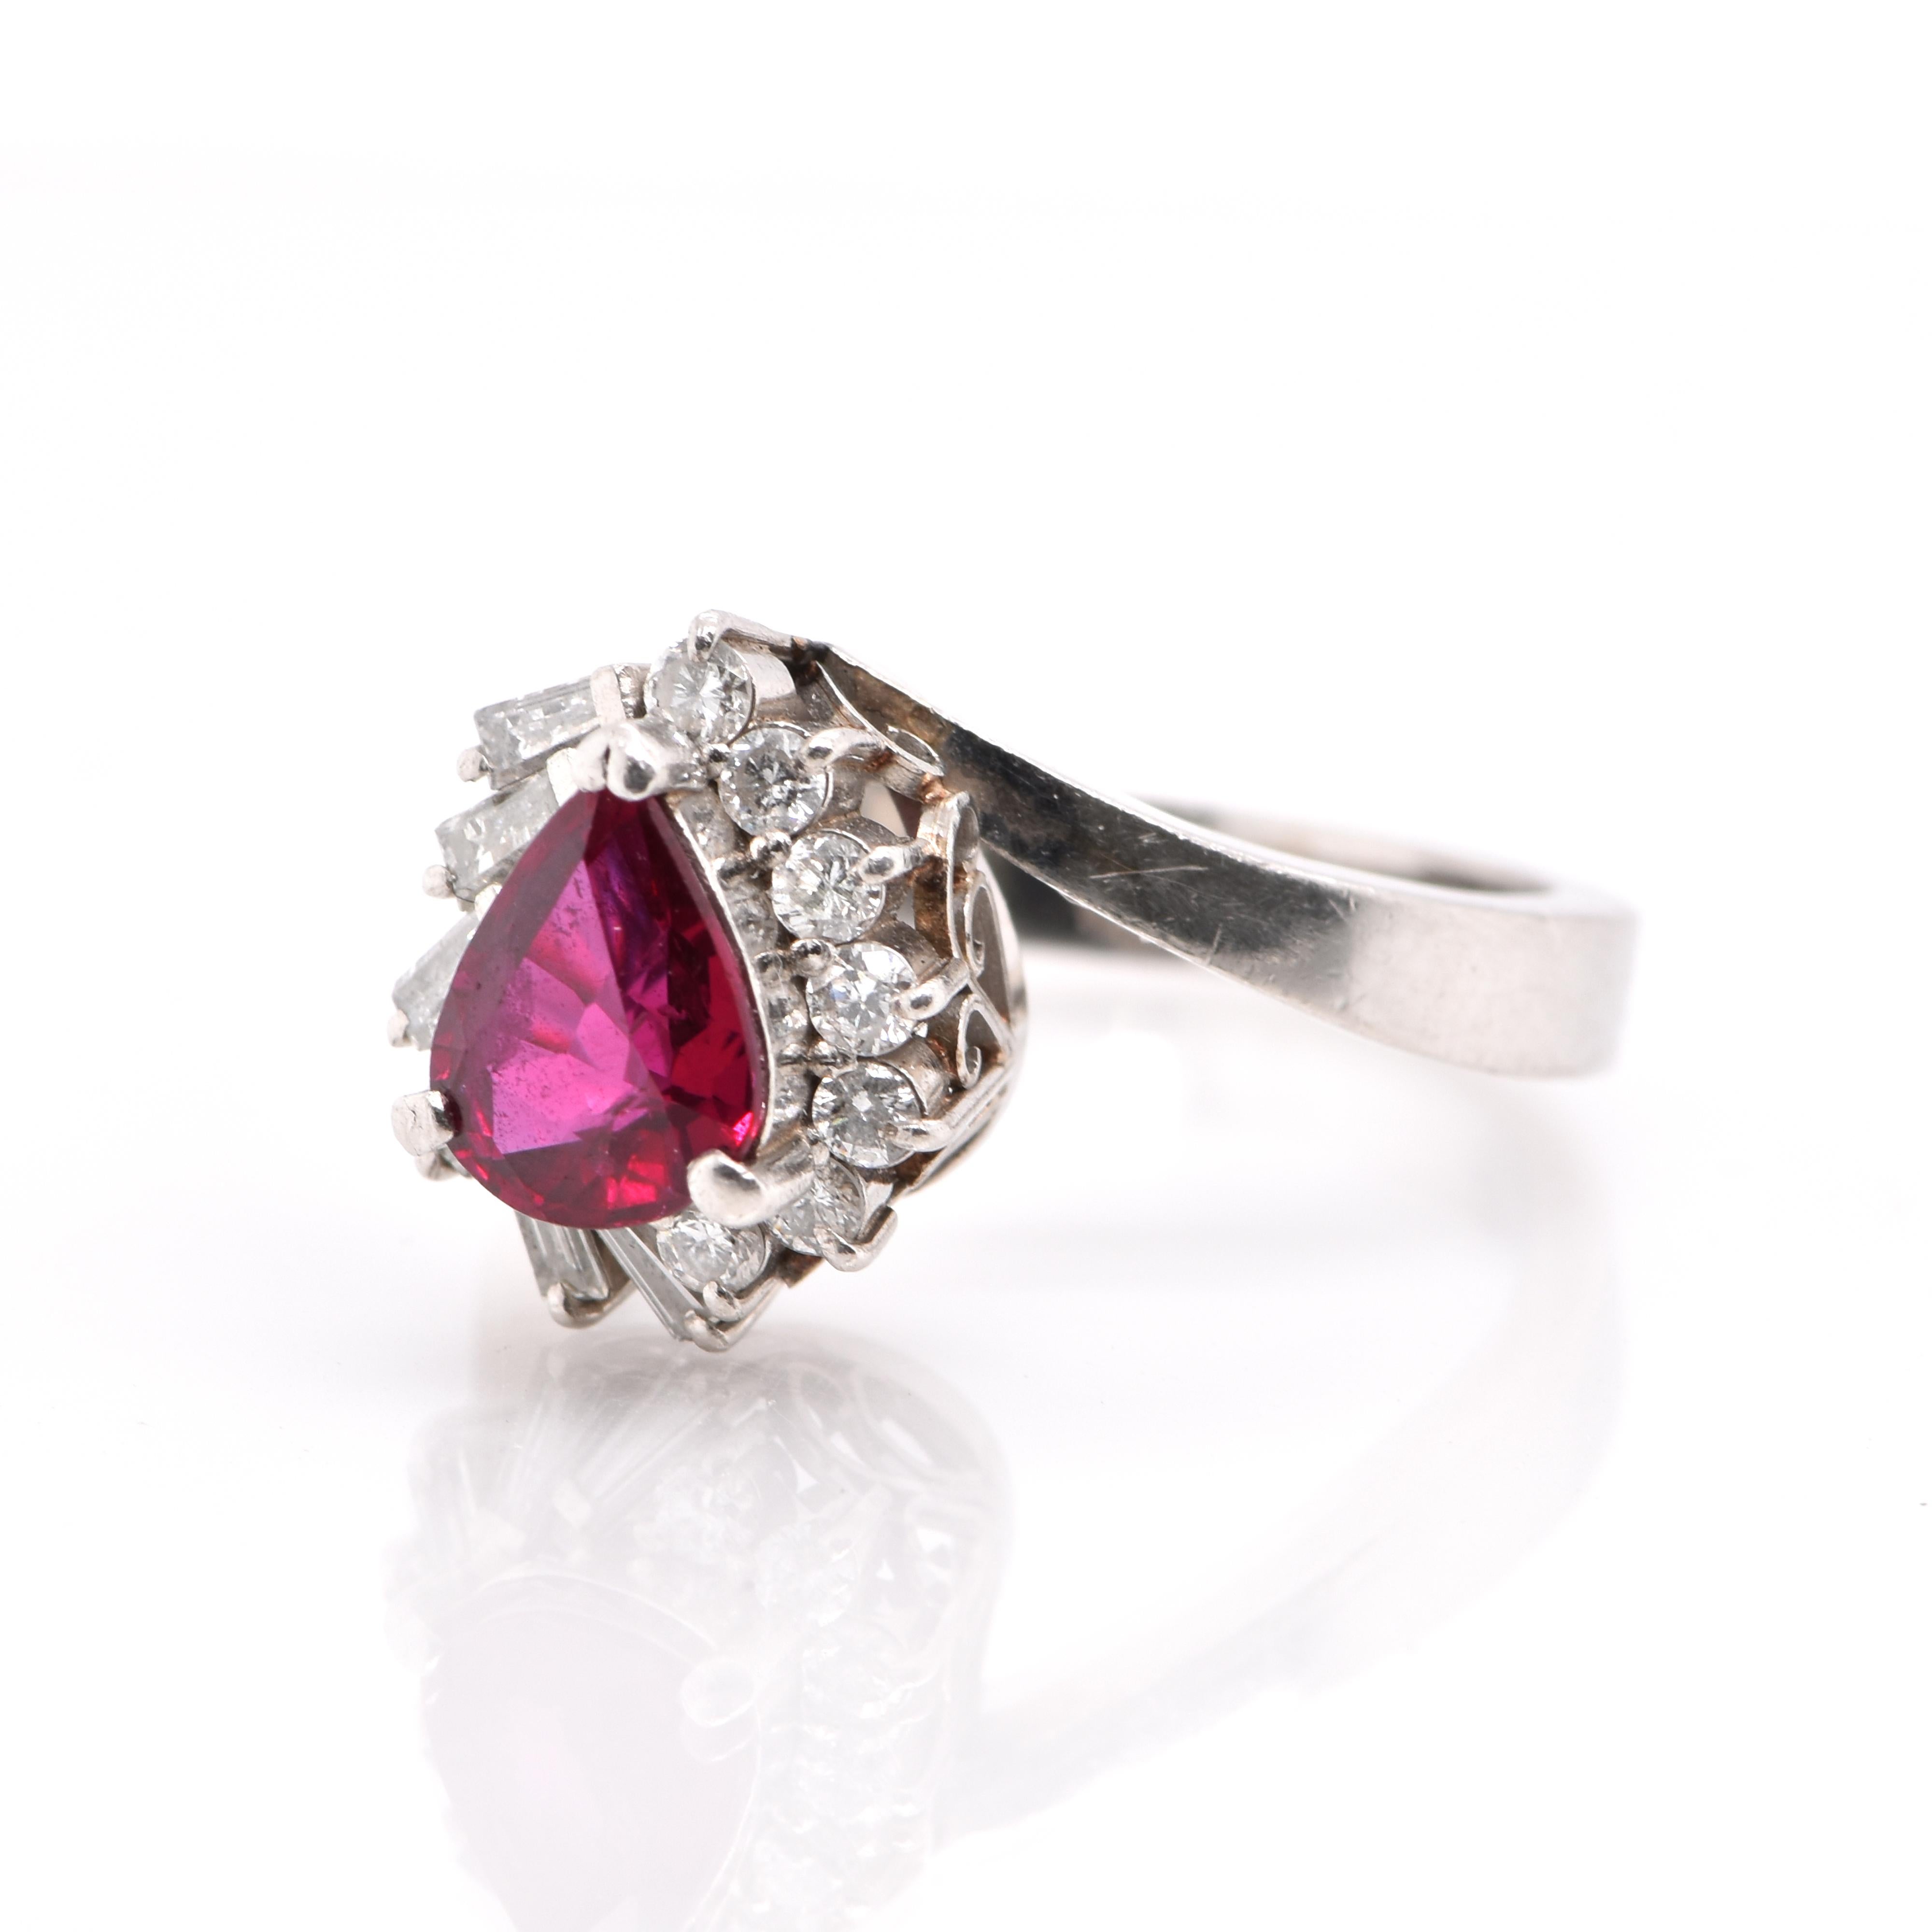 A beautiful Antique Ring featuring a 1.17 Carat Natural Ruby and 0.39 Carats of Diamond Accents set in Platinum. Rubies are referred to as 